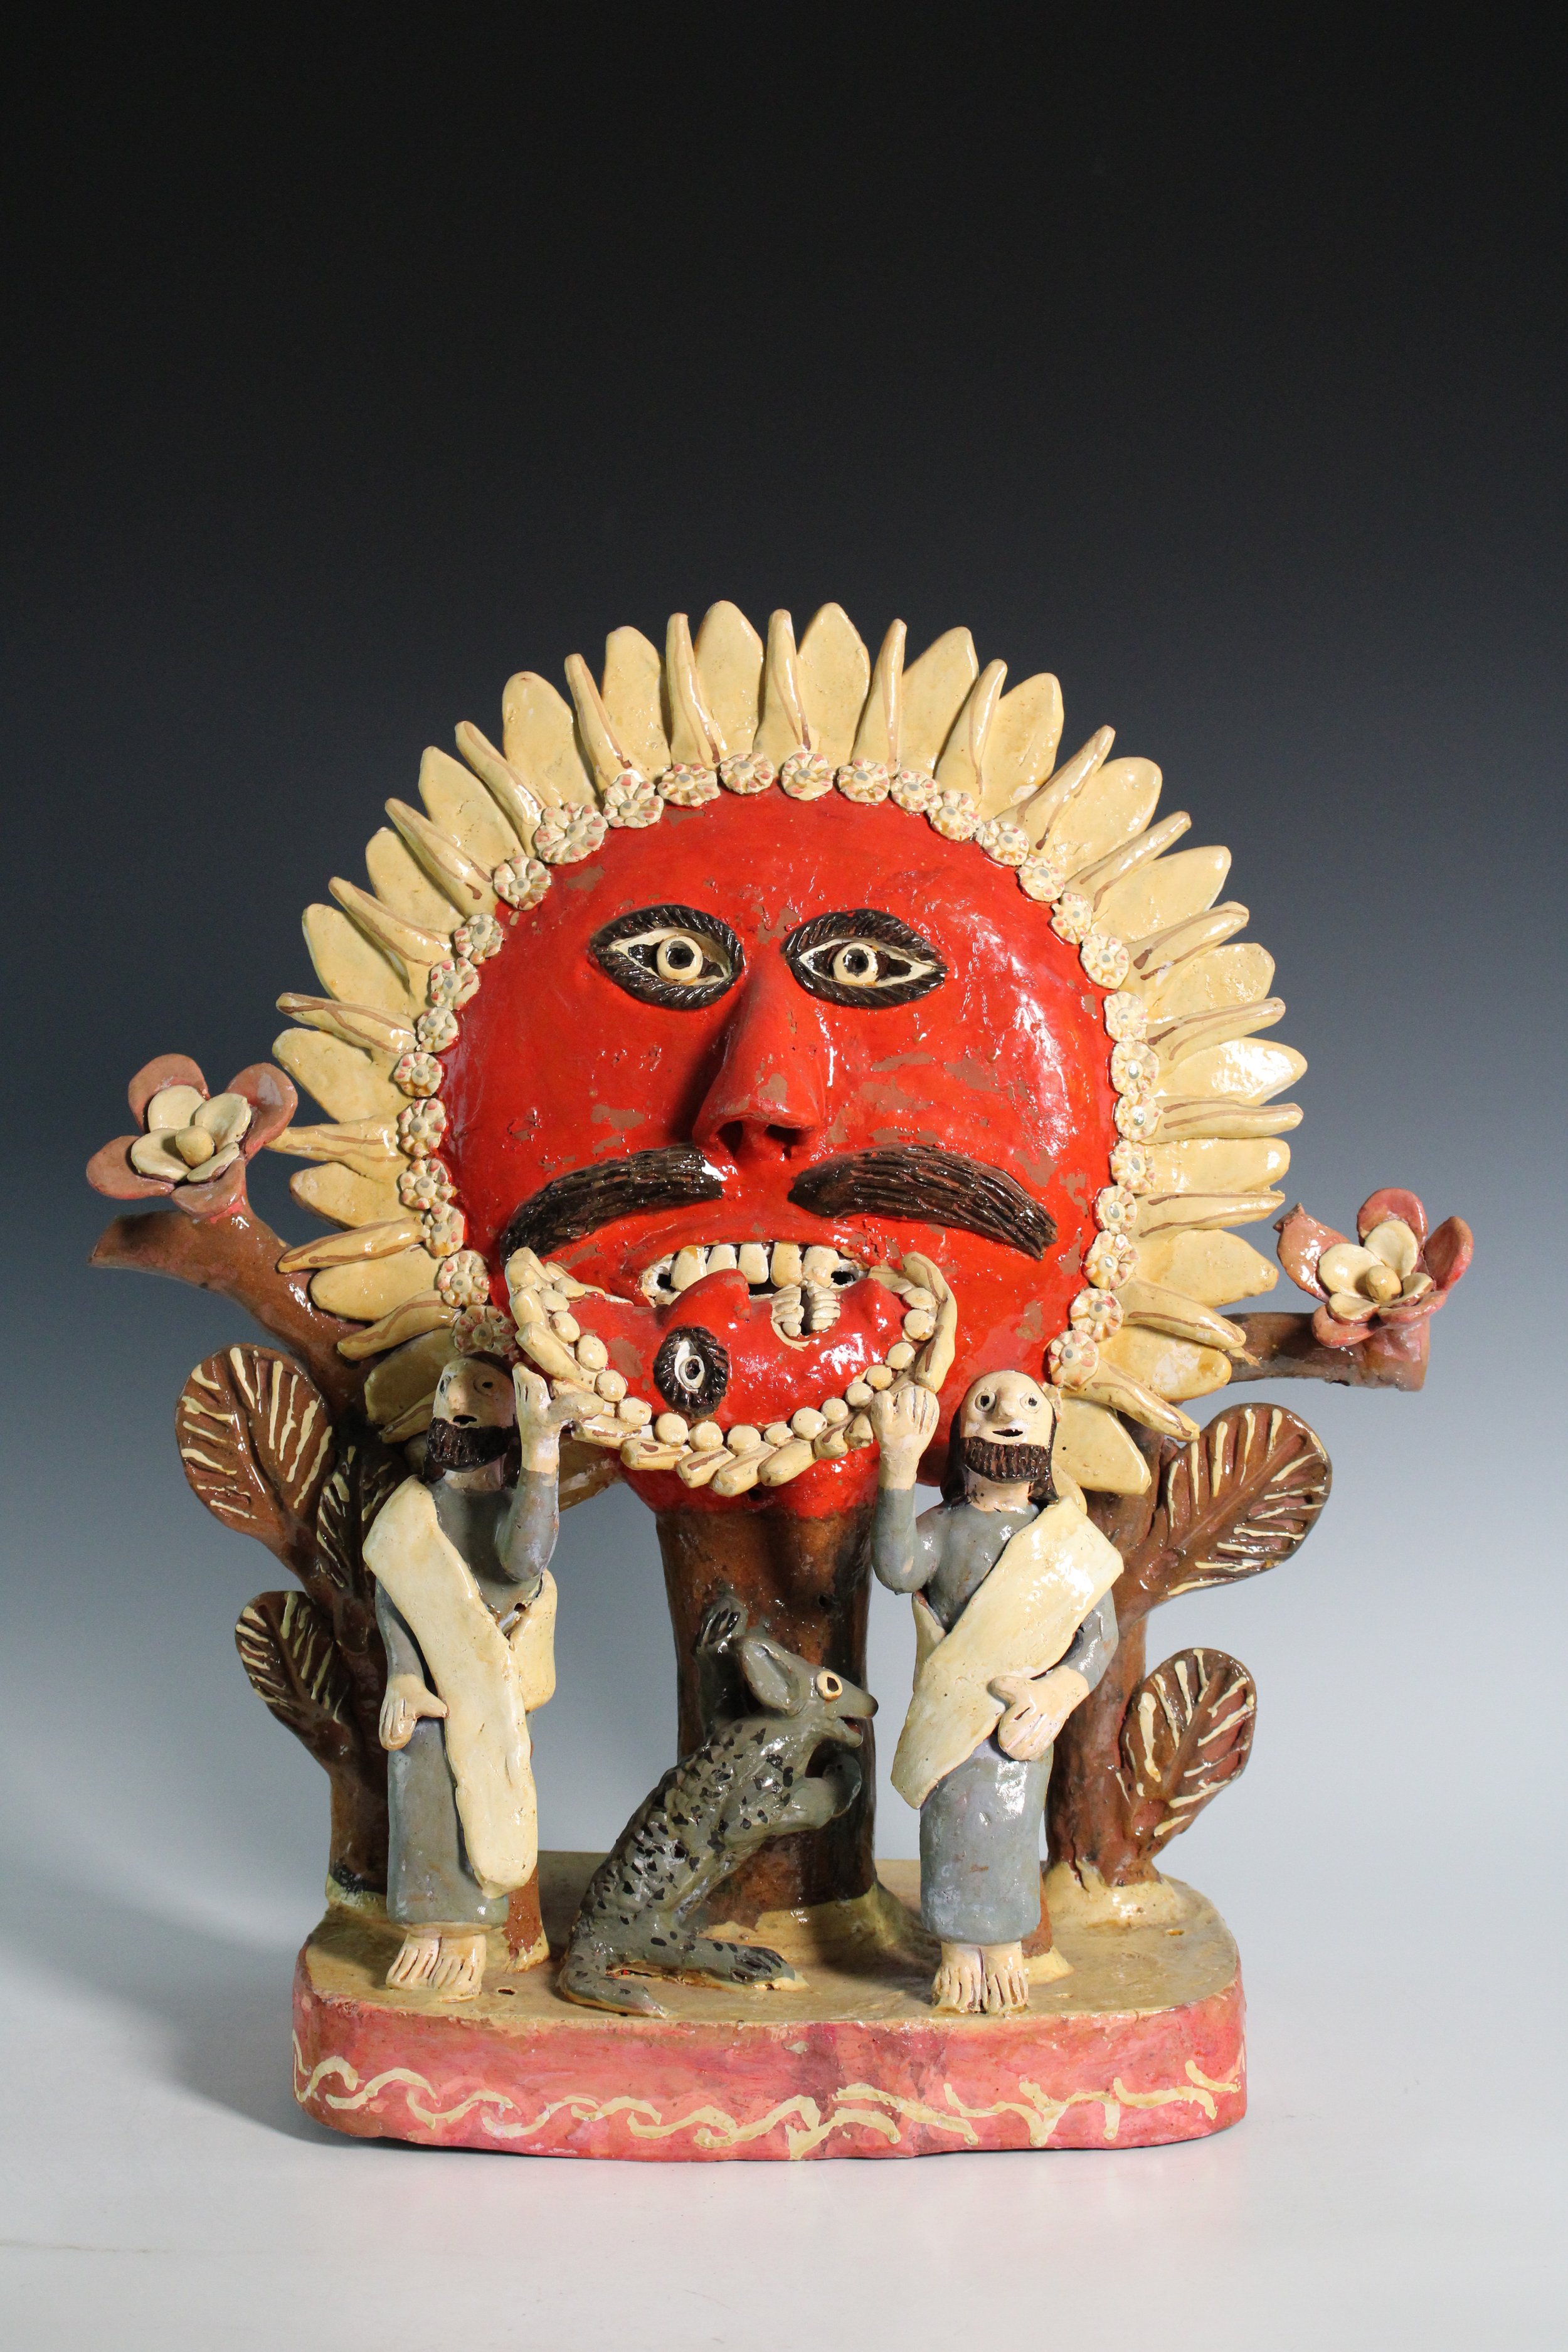 Mexican Folk Art Polychrome Earthenware Sculpture Featuring the Sun, Moon, Flowers, Priests, and a Tuza or Mole, 20th Century